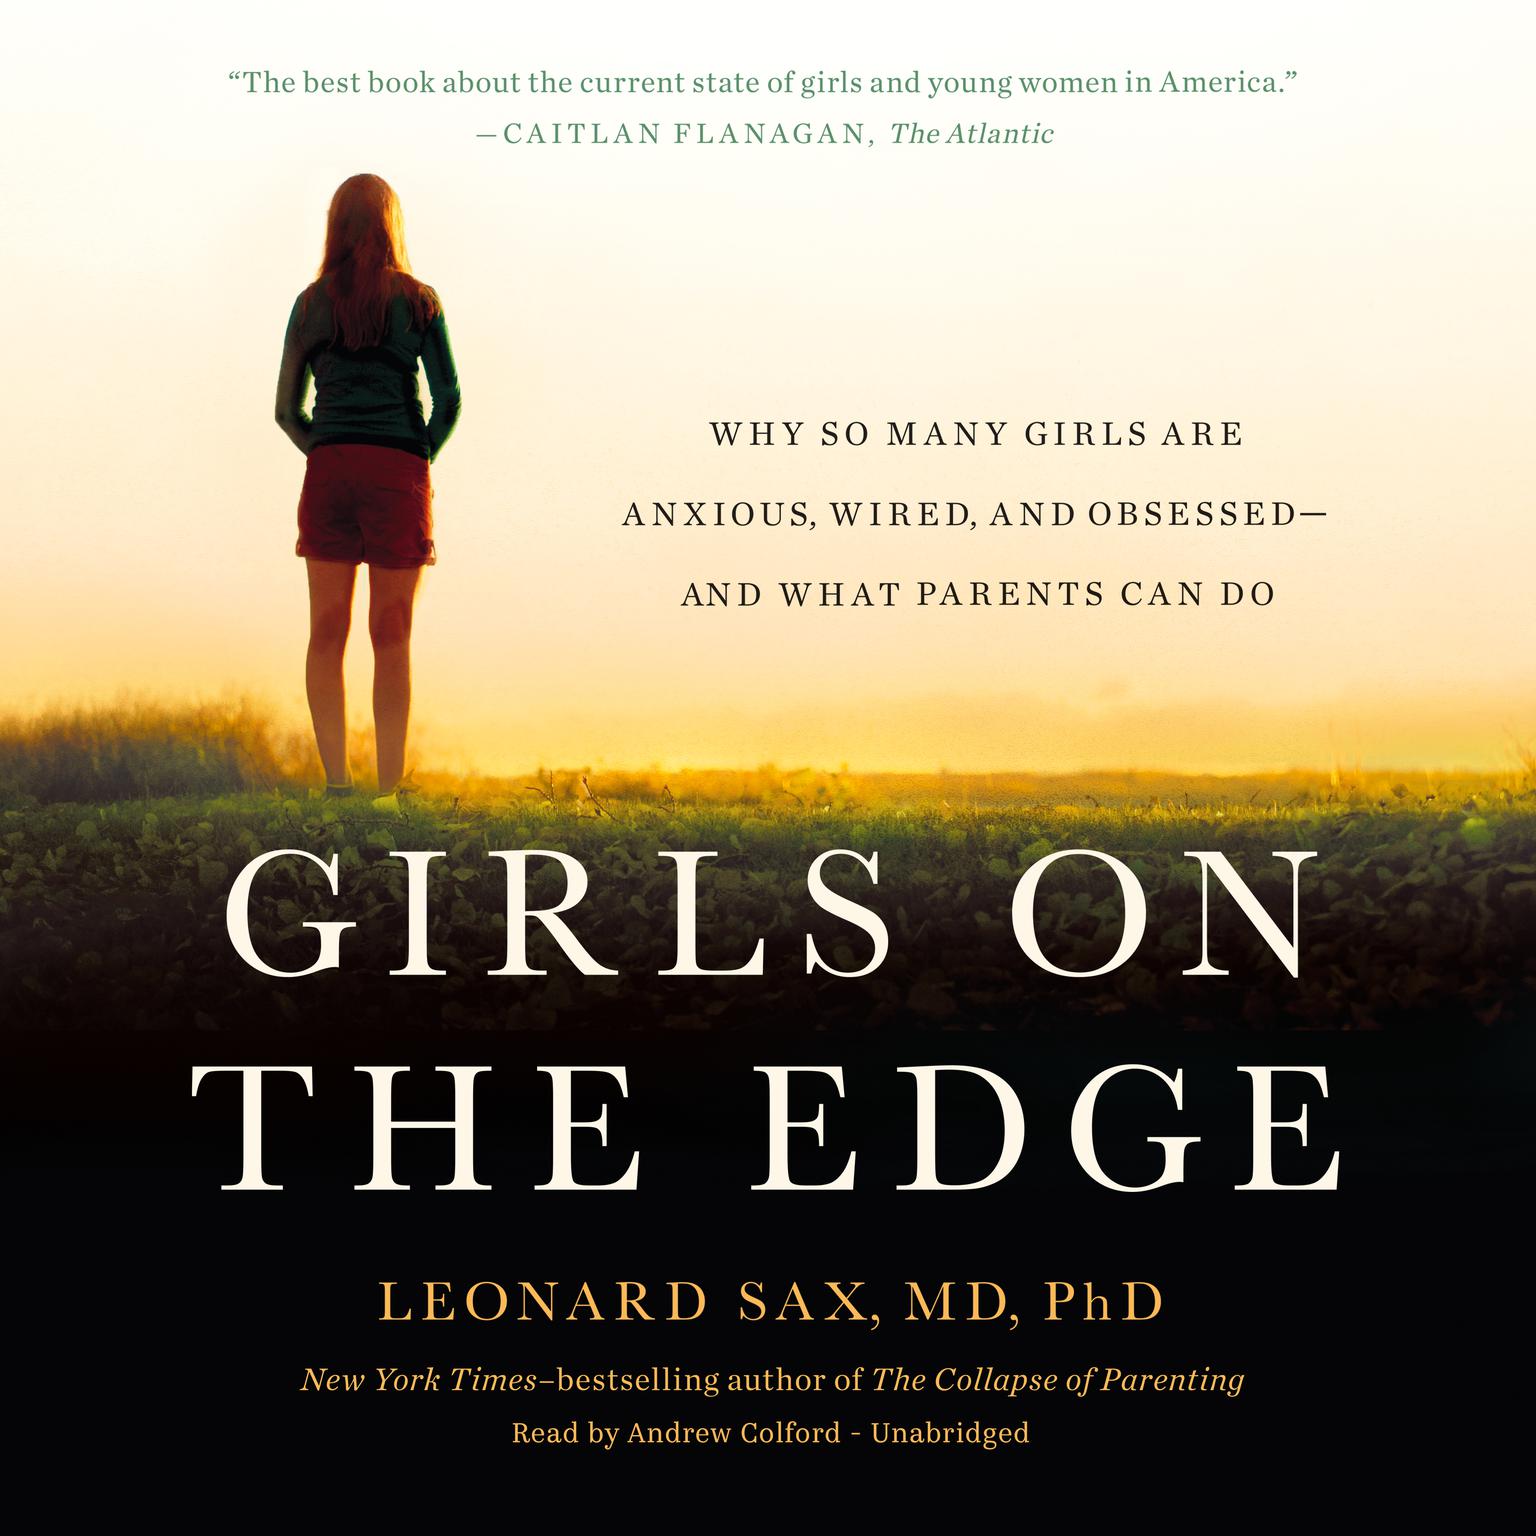 Girls on the Edge: Why So Many Girls Are Anxious, Wired, and Obsessed--And What Parents Can Do Audiobook, by Leonard Sax